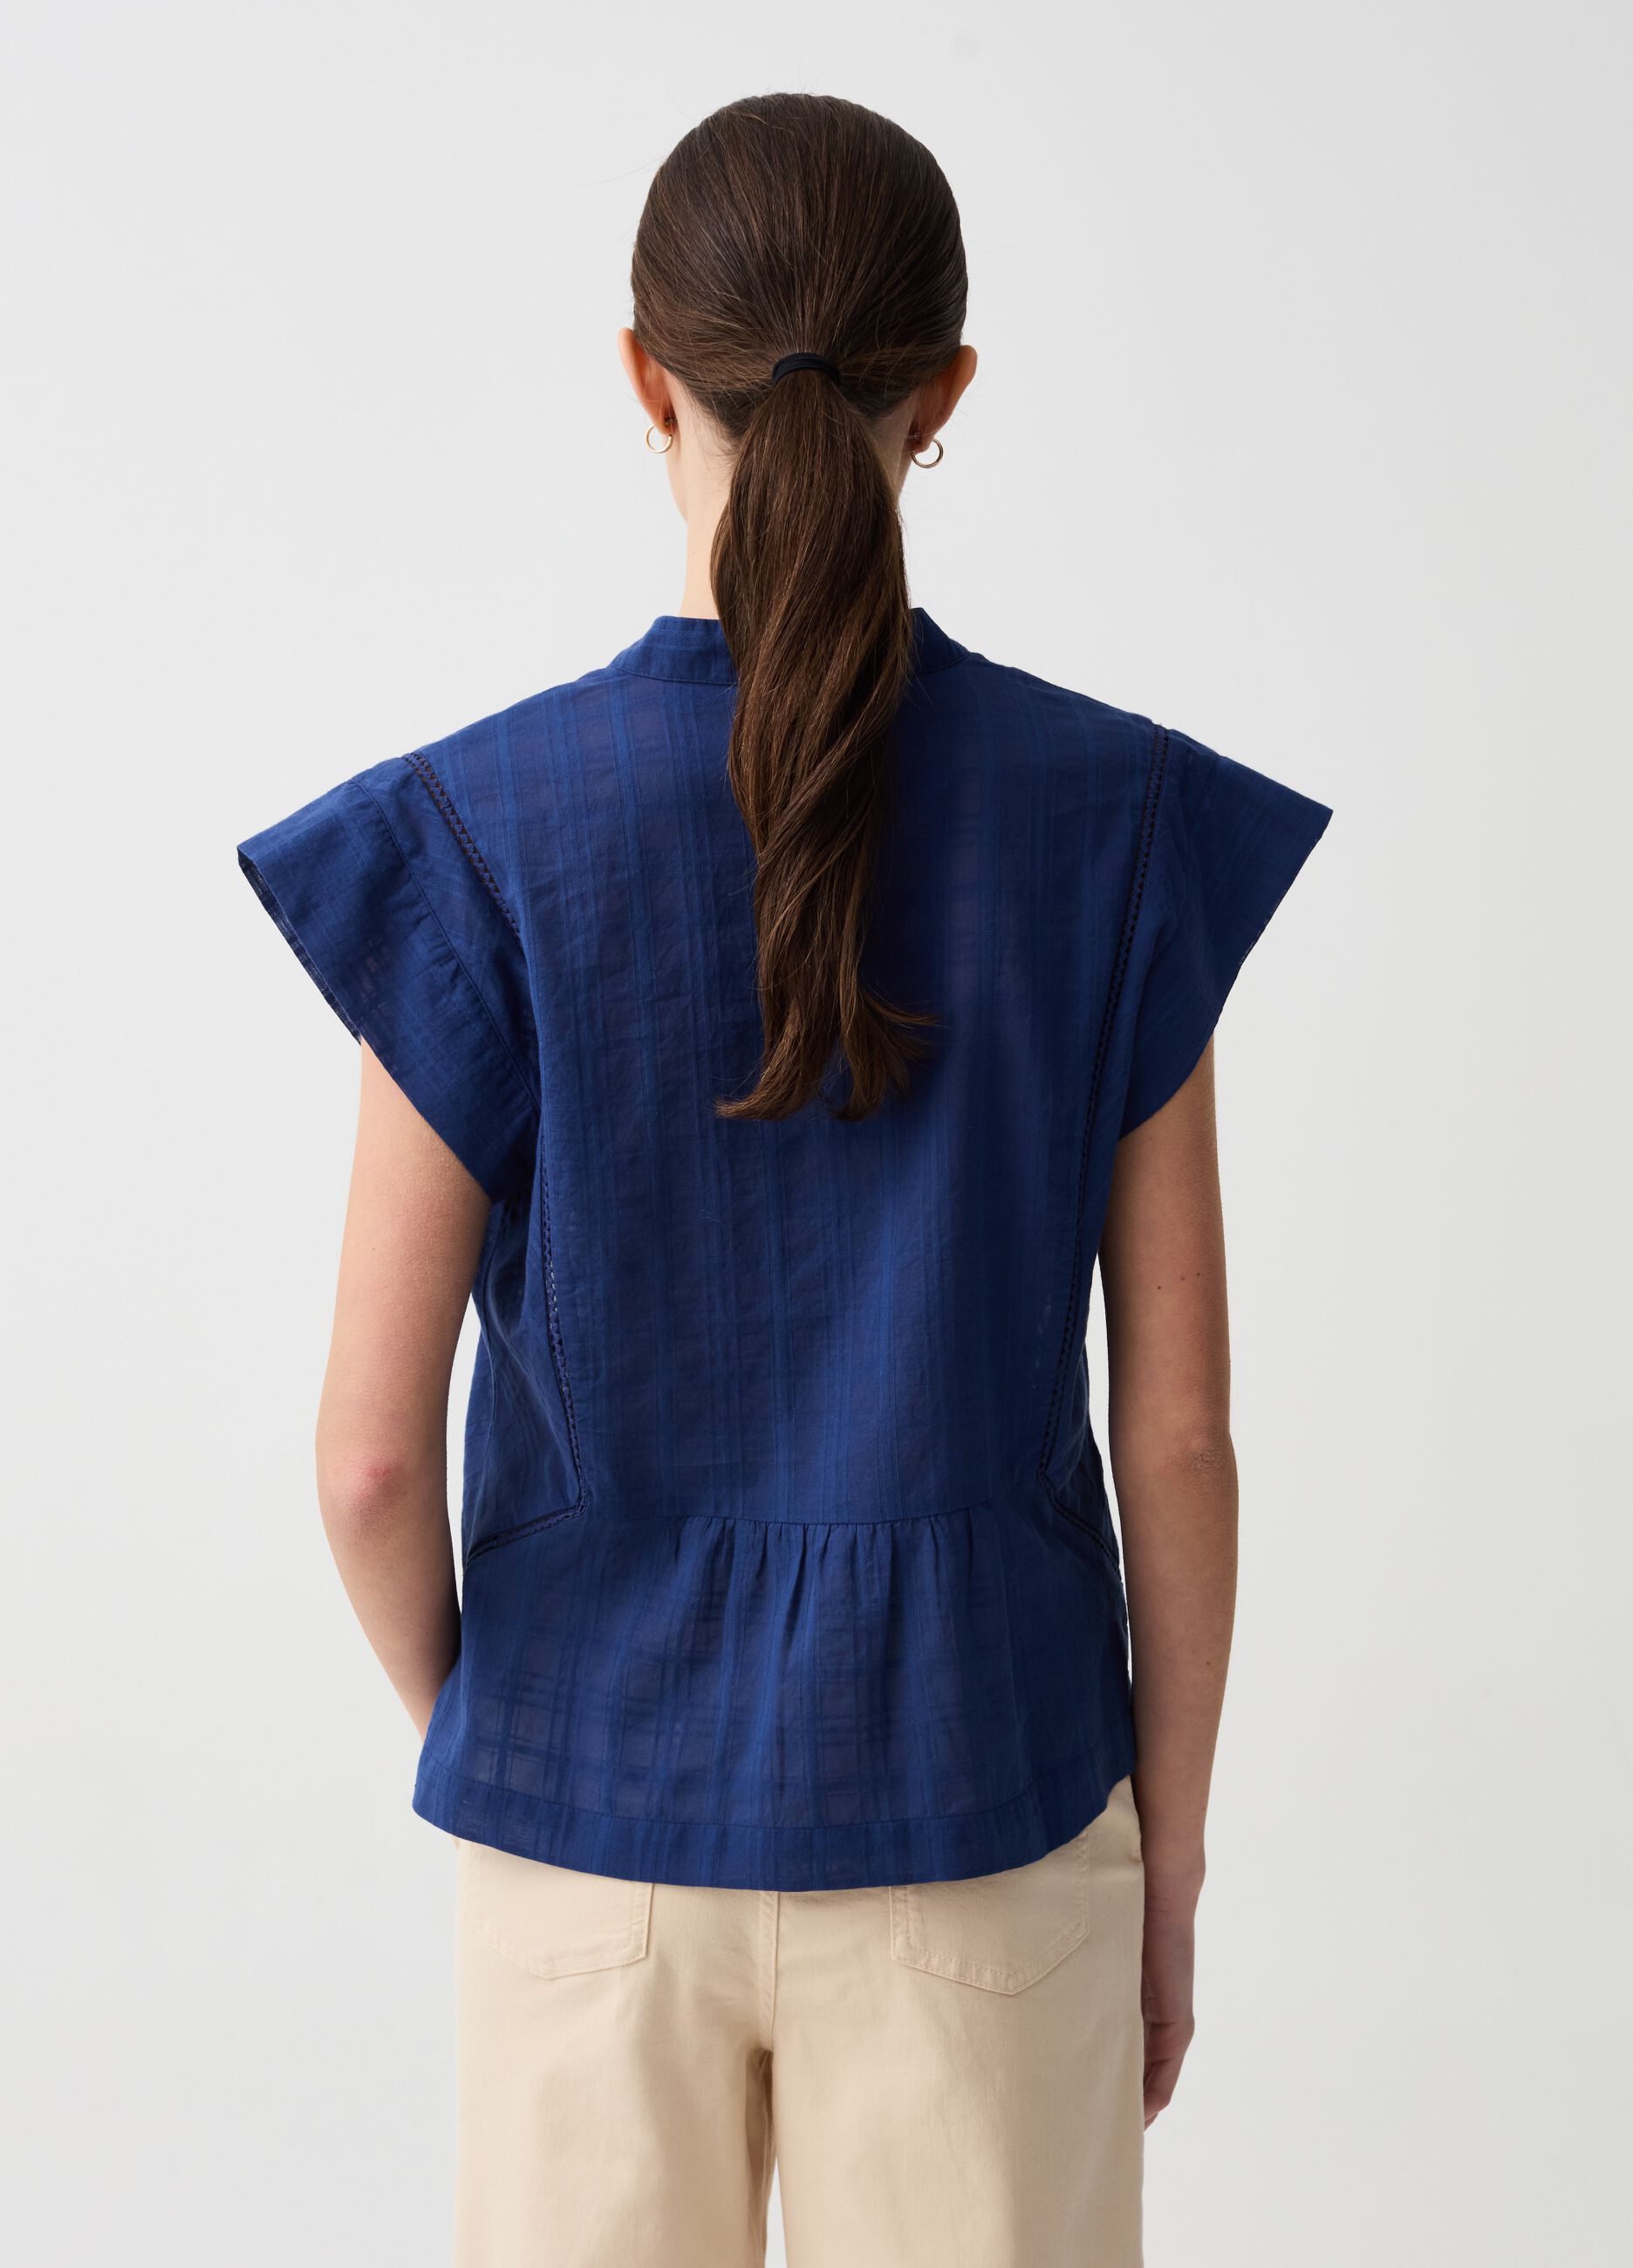 Blouse with check design and à jour embroidery